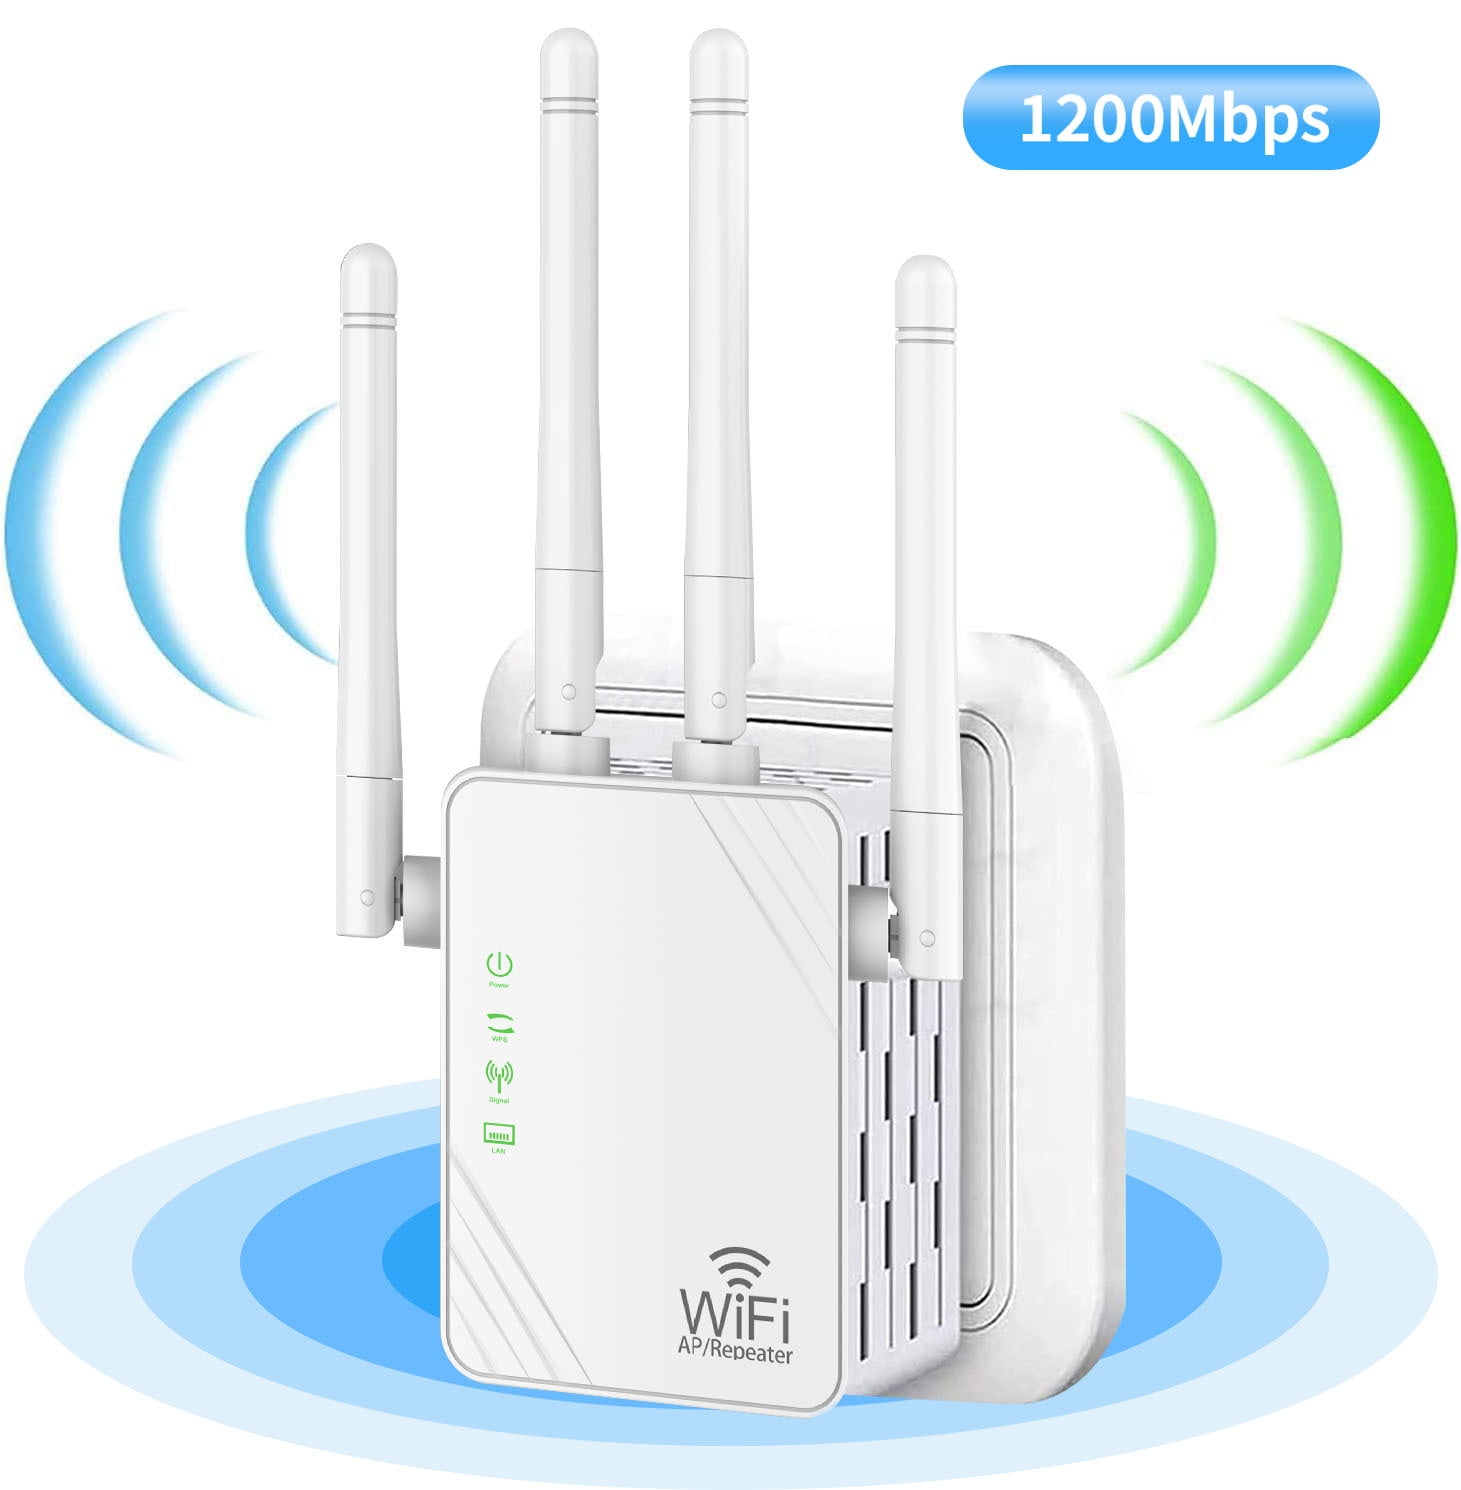 Stereotype Humoristisk aritmetik GLEADING WiFi Extender,WiFi Booster Indoor/Outdoor Repeater Signal Booster  1200Mbps WiFi Amplifier Long Range High Speed 5G/2.4G WiFi Internet  Connection (White) - Walmart.com